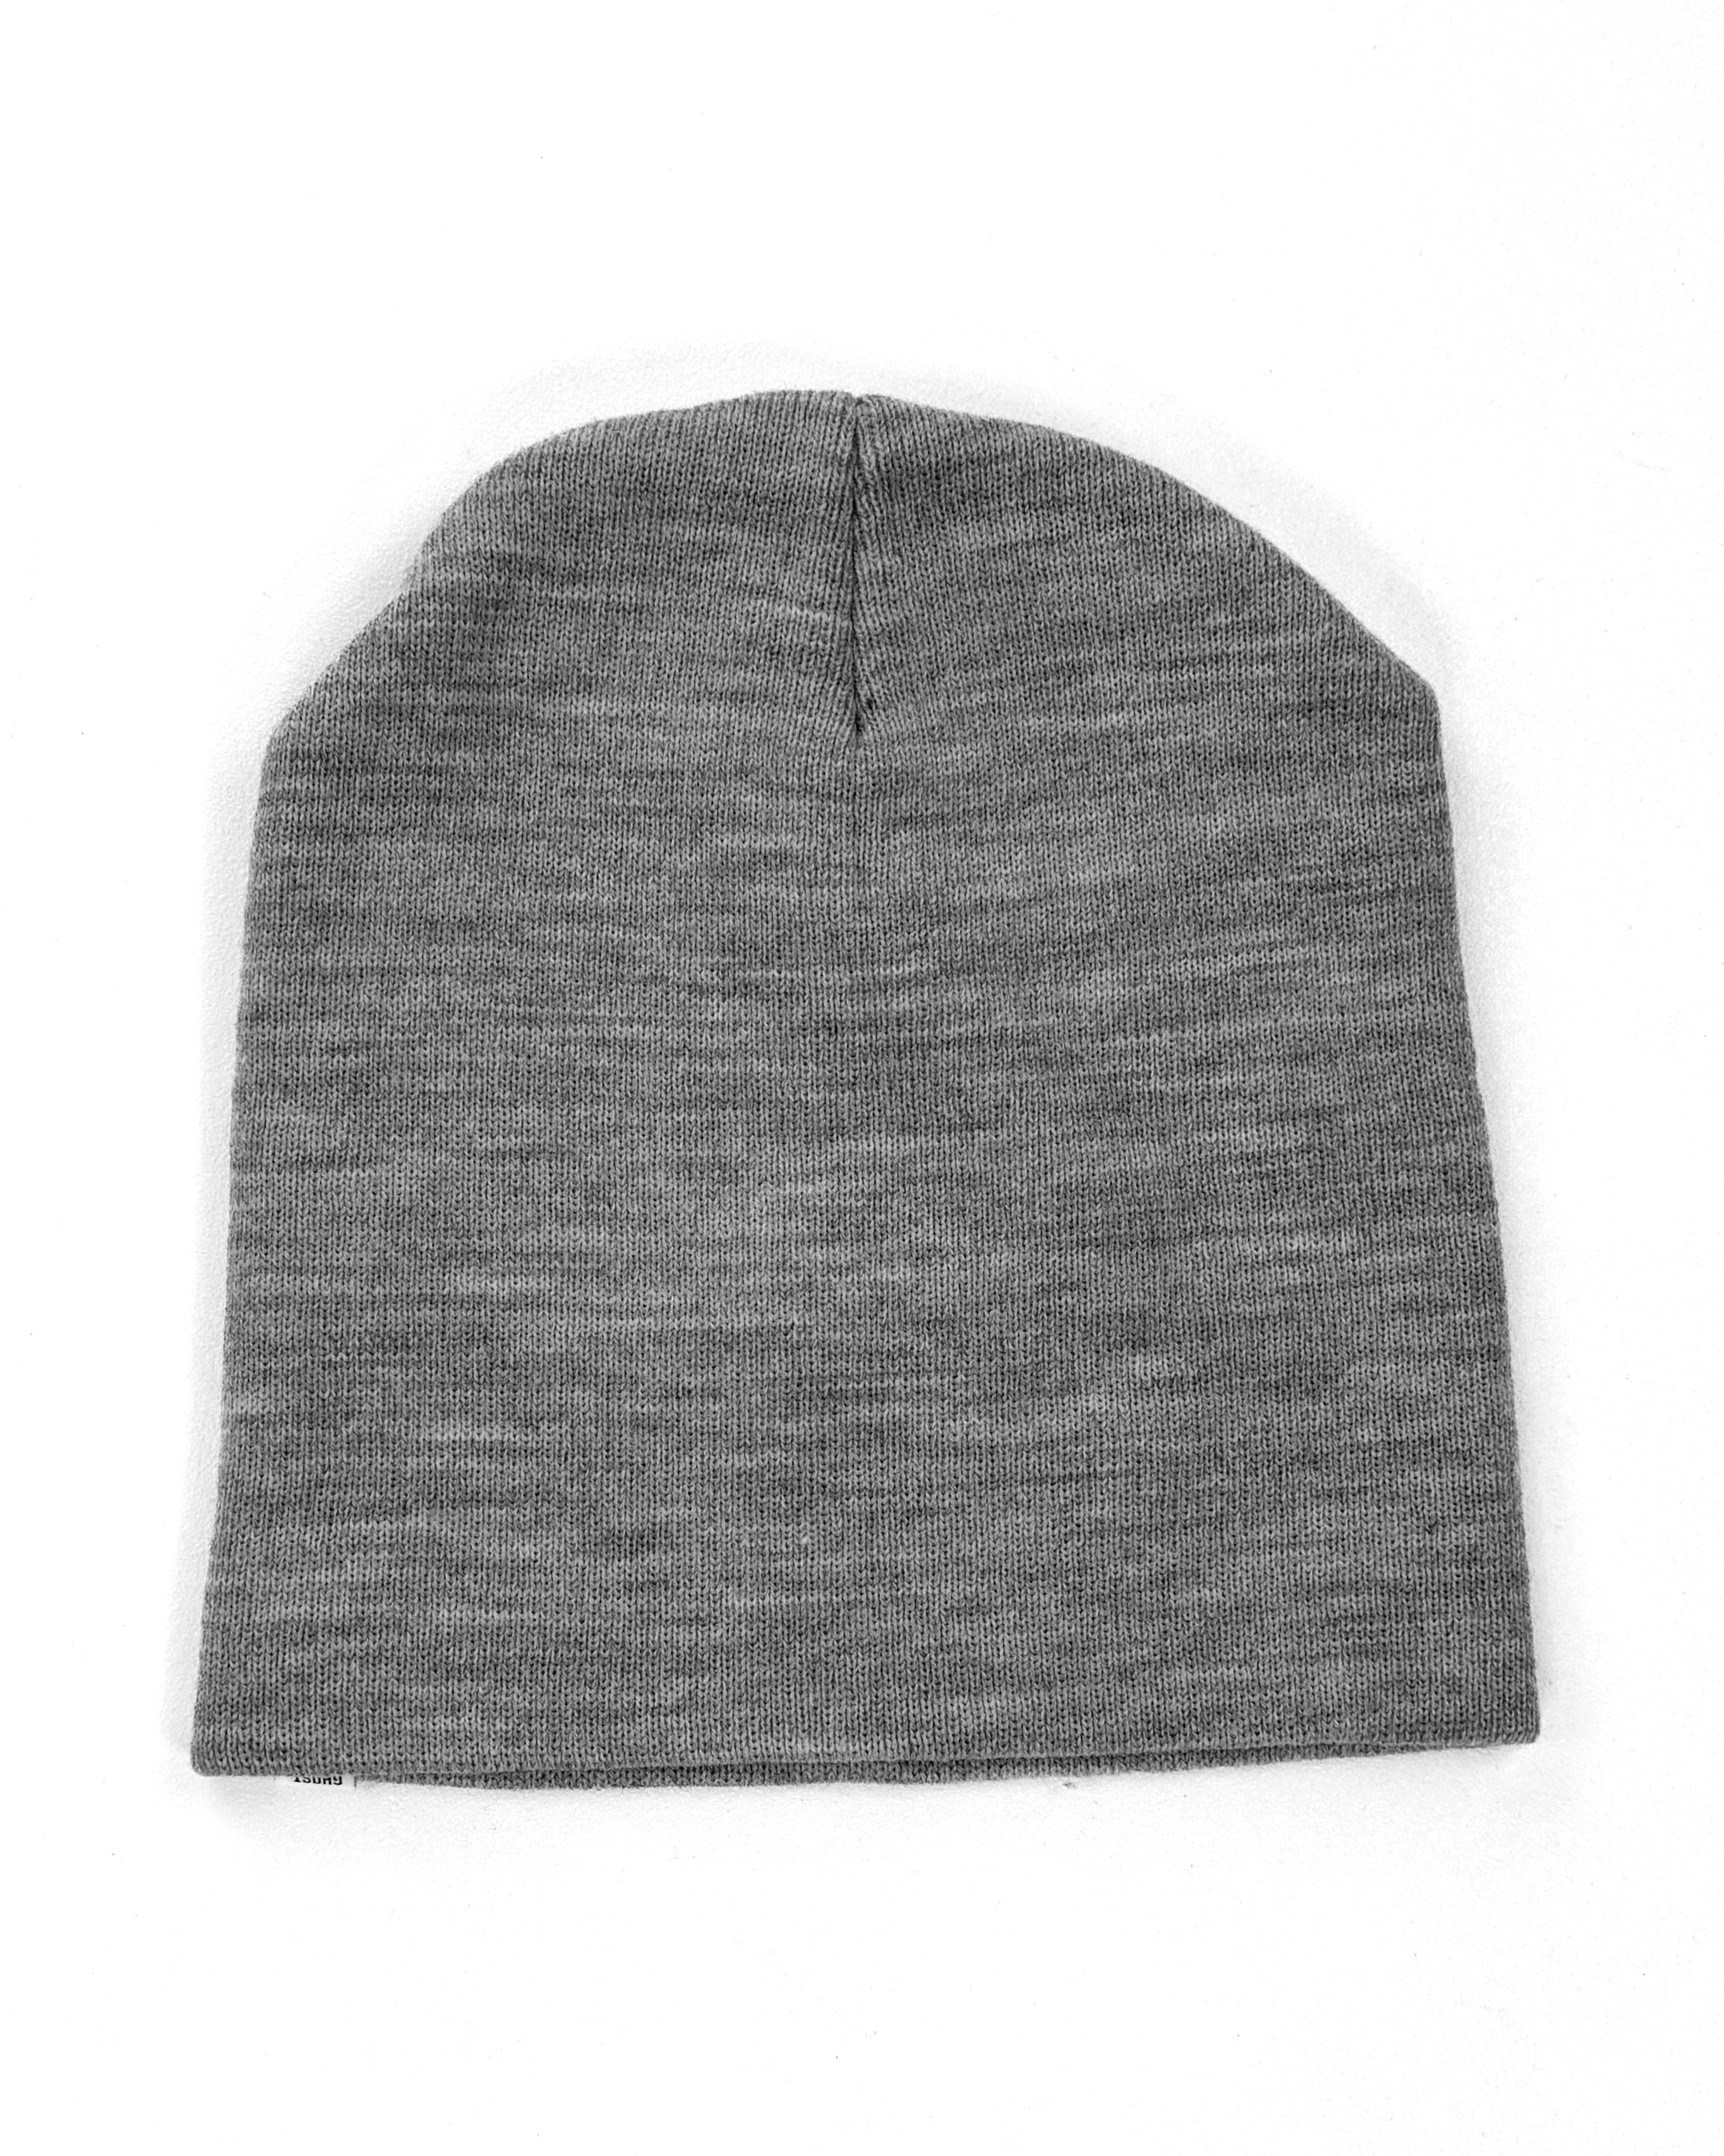 Hourglass Beanie - Athletic Gray - GHOSTSHIP.Supply